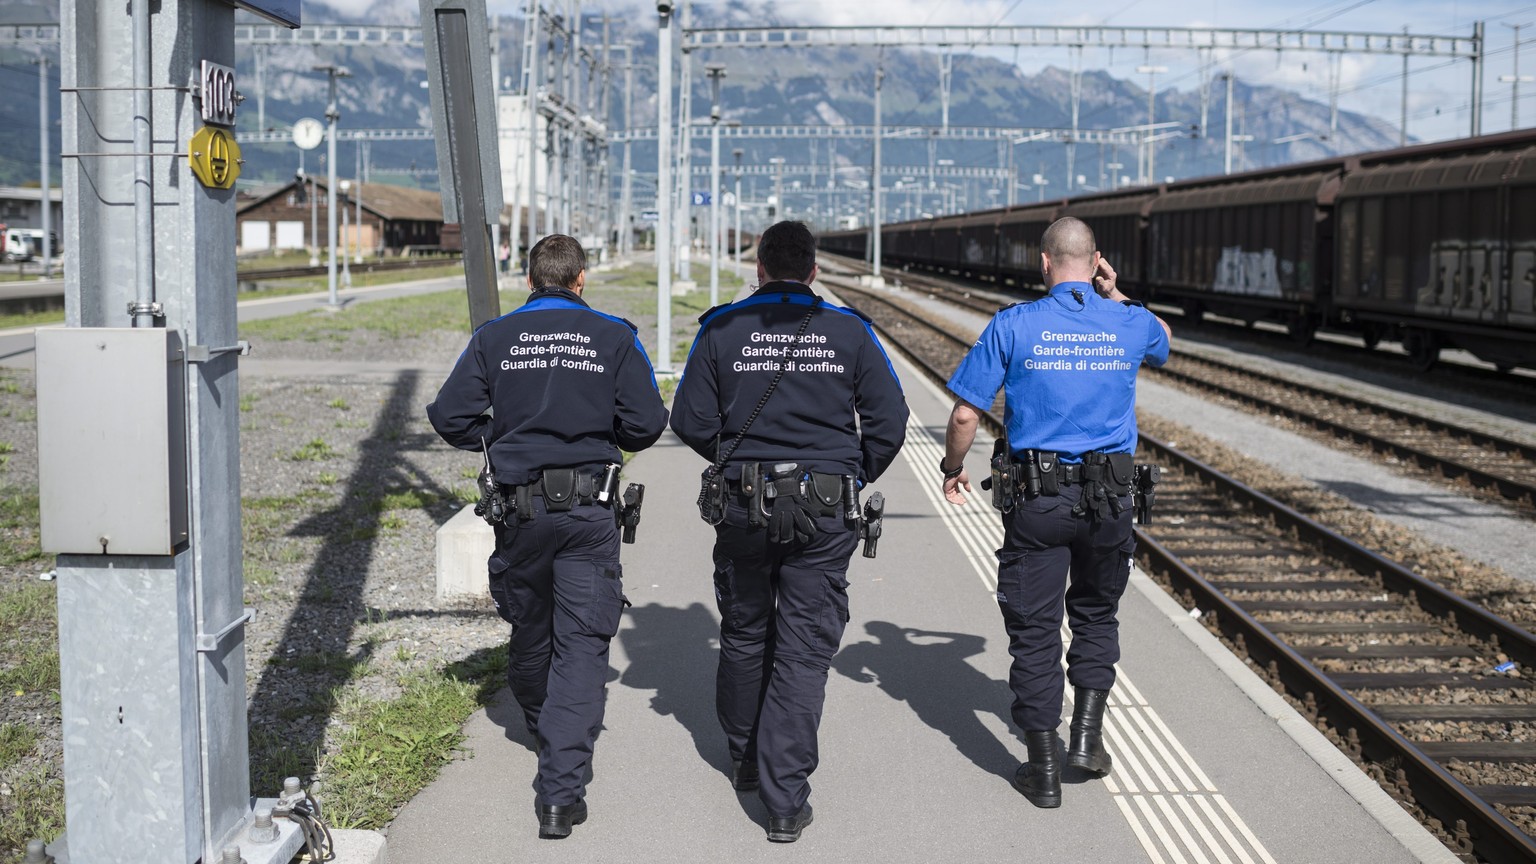 epa04948519 Border control policemen wait for a Railjet train coming from Vienna witch they will check for possible migrants on board, Buchs, Austria, 25 September 2015. EPA/GIAN EHRENZELLER